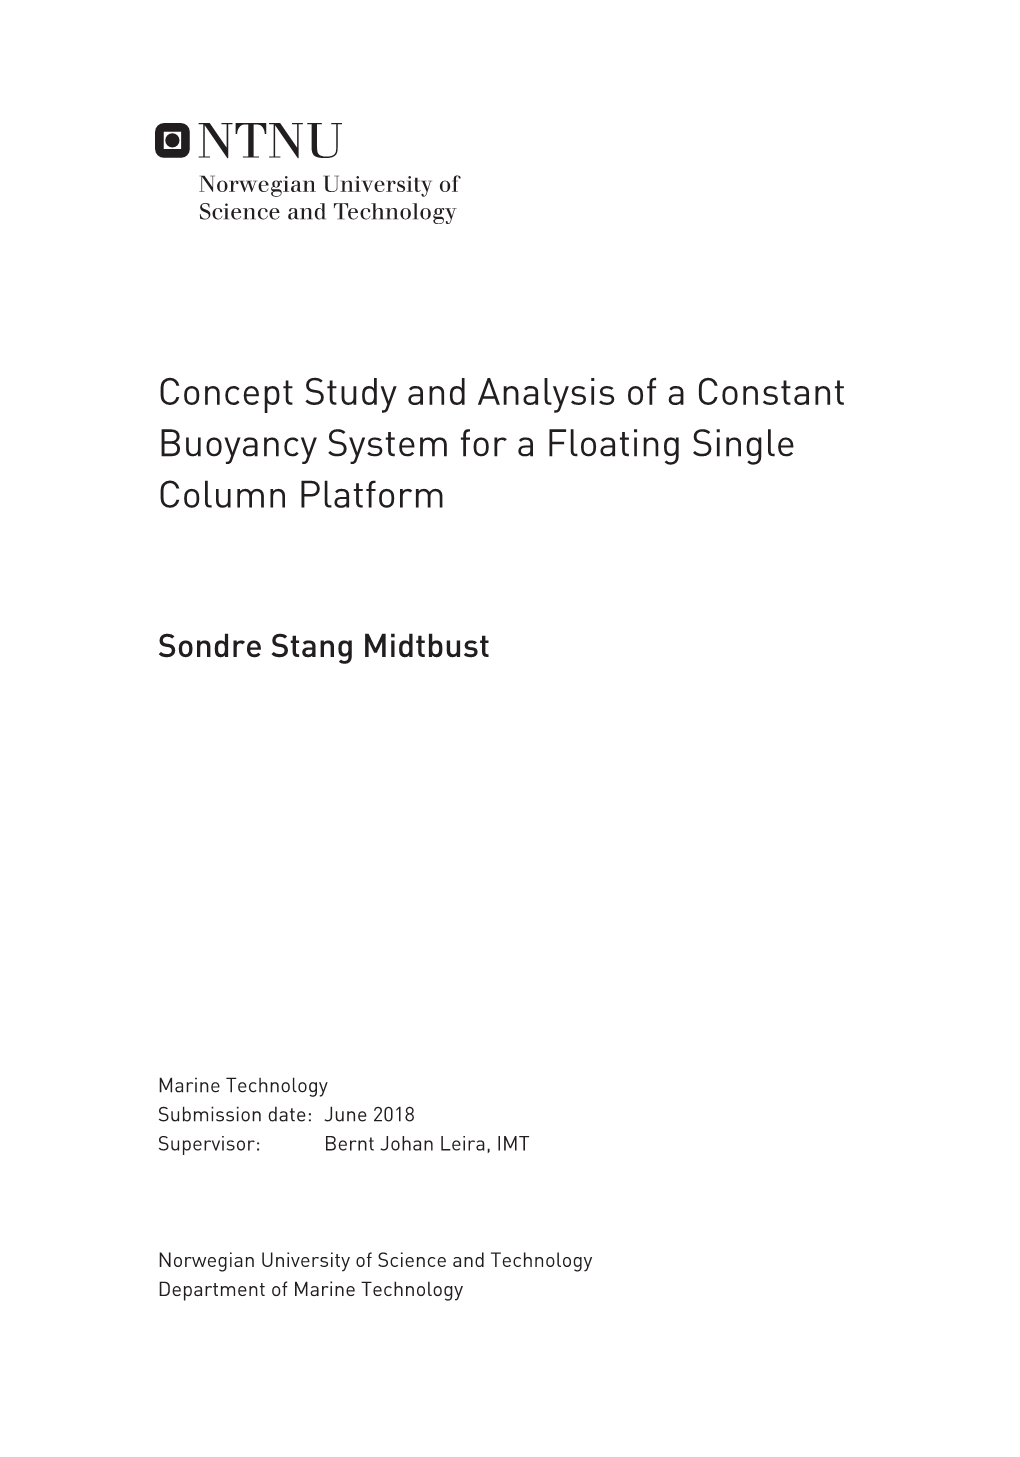 Concept Study and Analysis of a Constant Buoyancy System for a Floating Single Column Platform